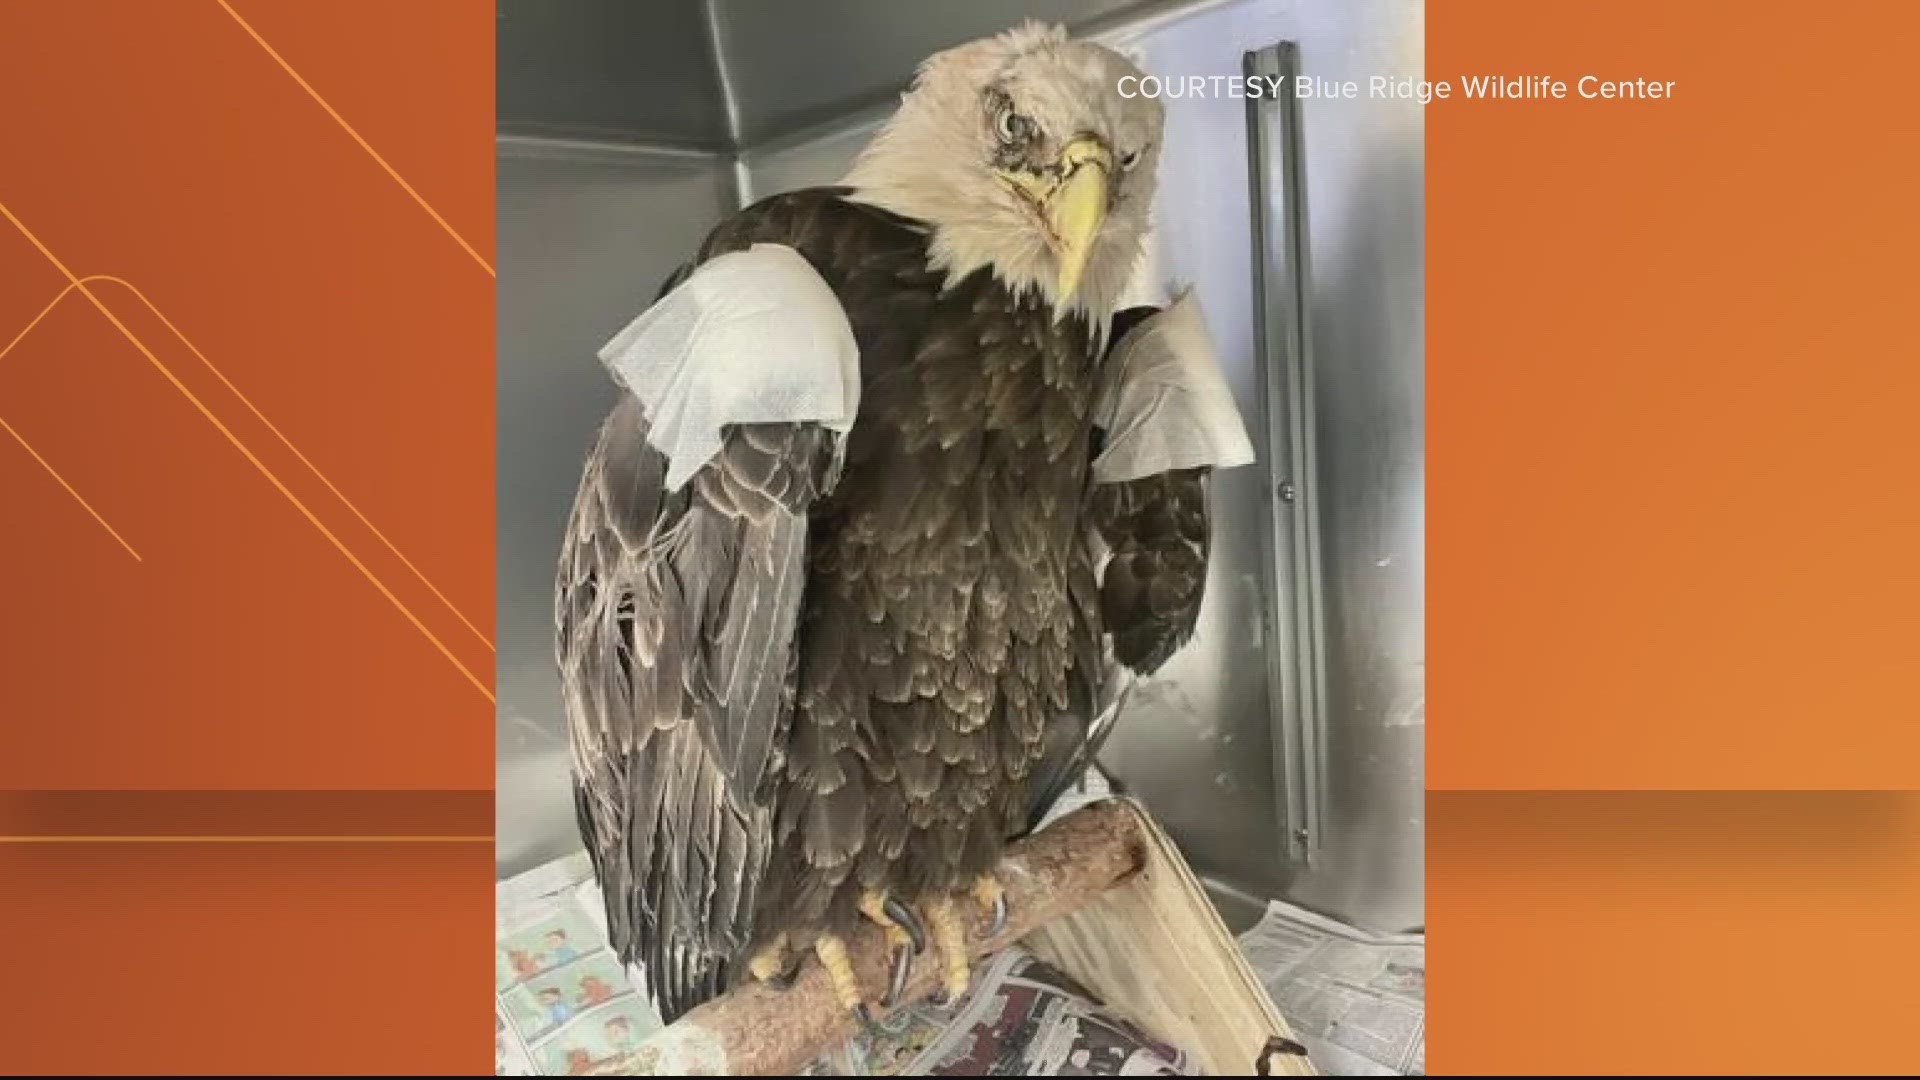 The eagle was brought in to the Blue Ridge Wildlife Center in February with a skull fracture